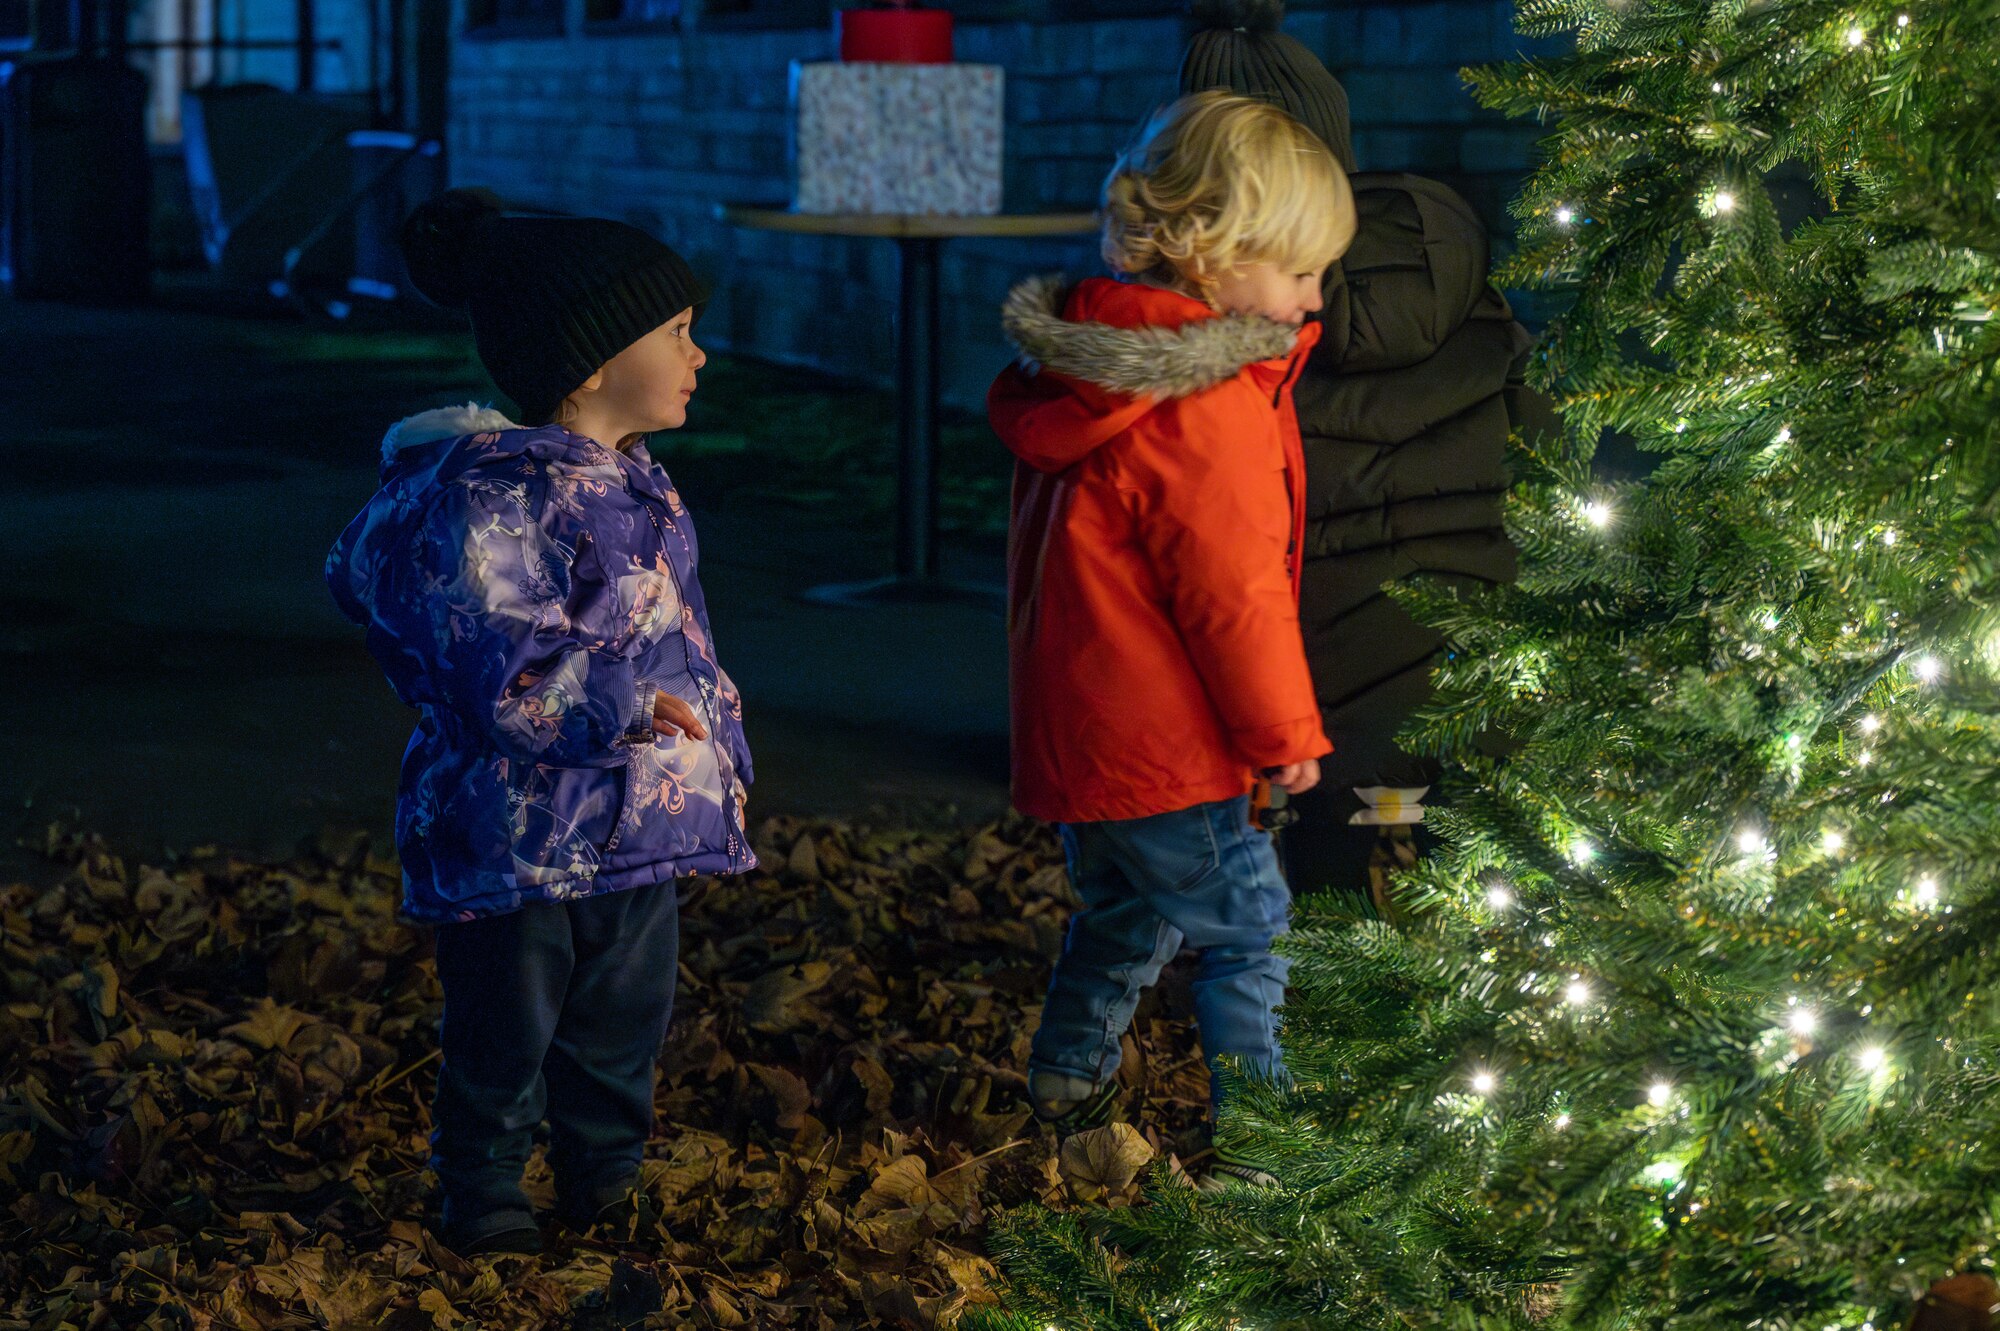 Children gaze at the lights after a tree lighting ceremony.